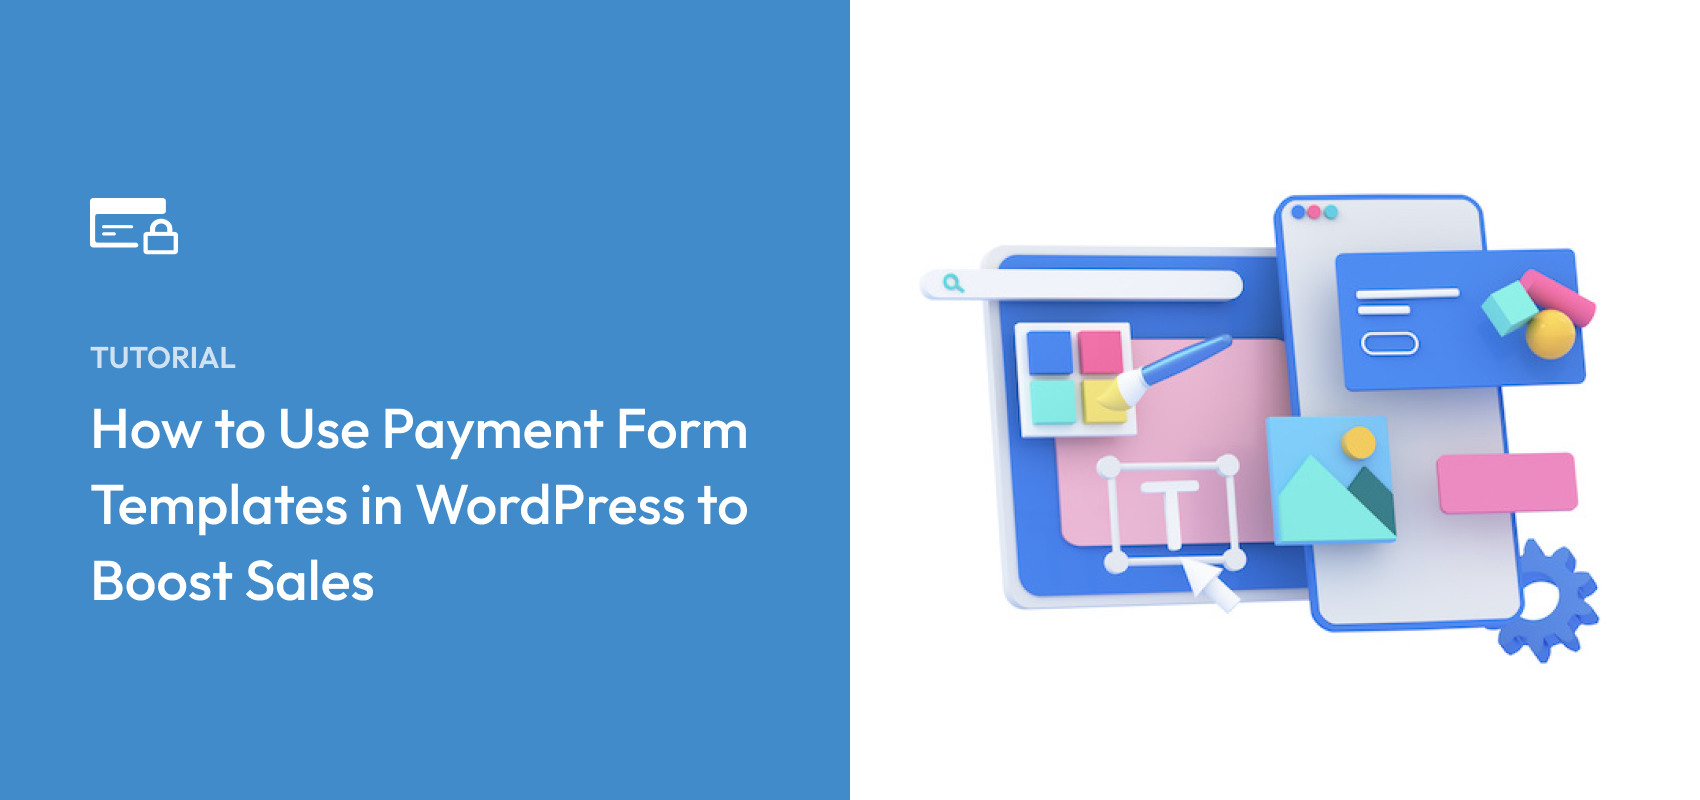 How to Use Payment Form Templates in WordPress to Boost Sales